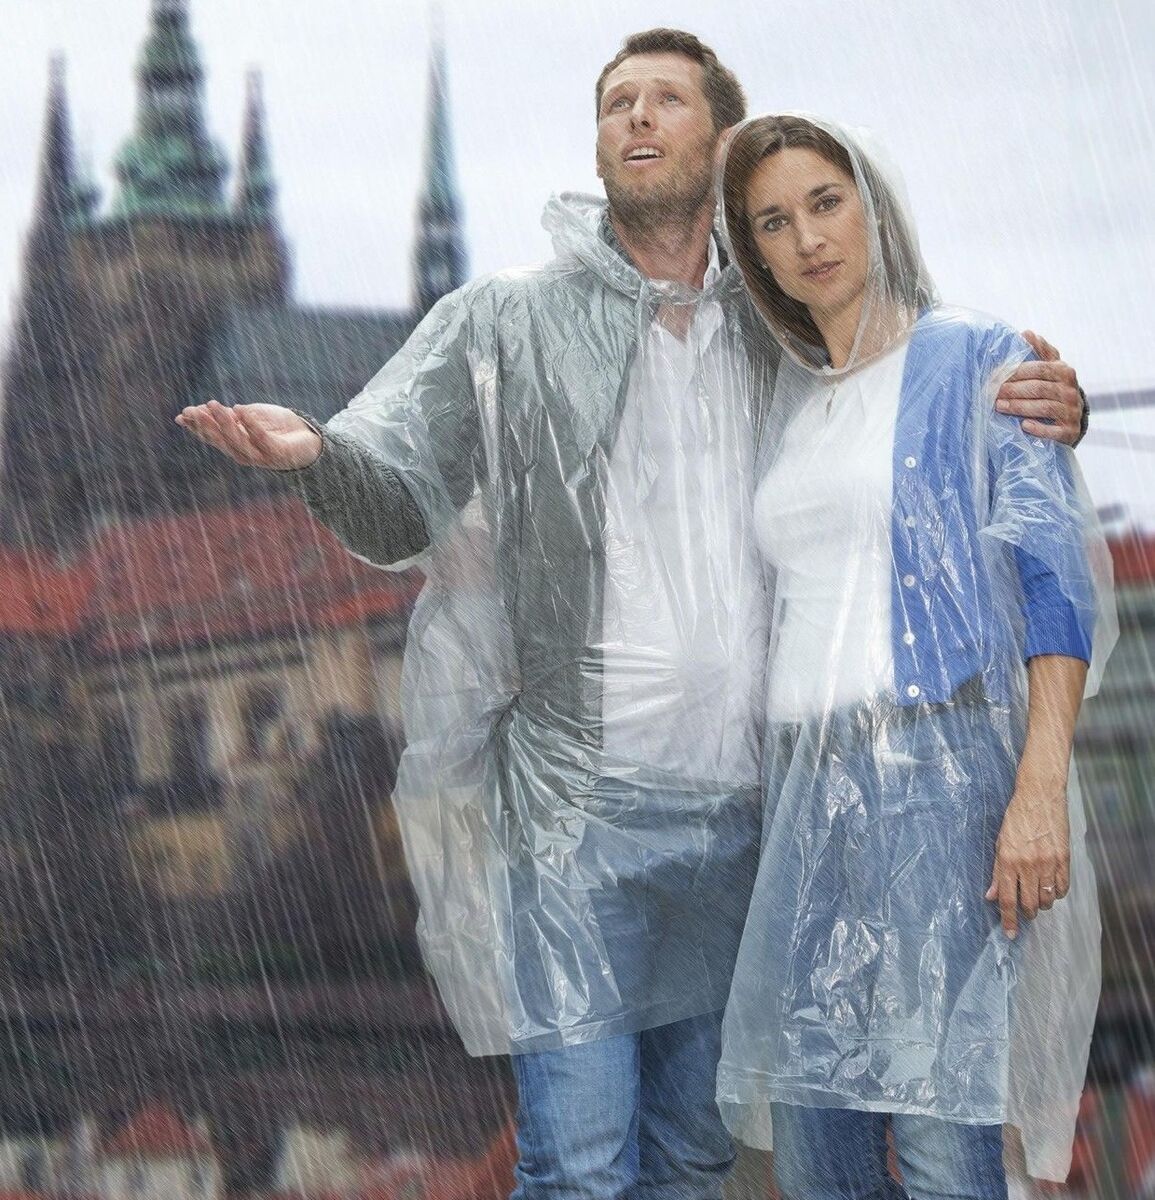 Unisex Disposable Rain Poncho (Pack of 5)